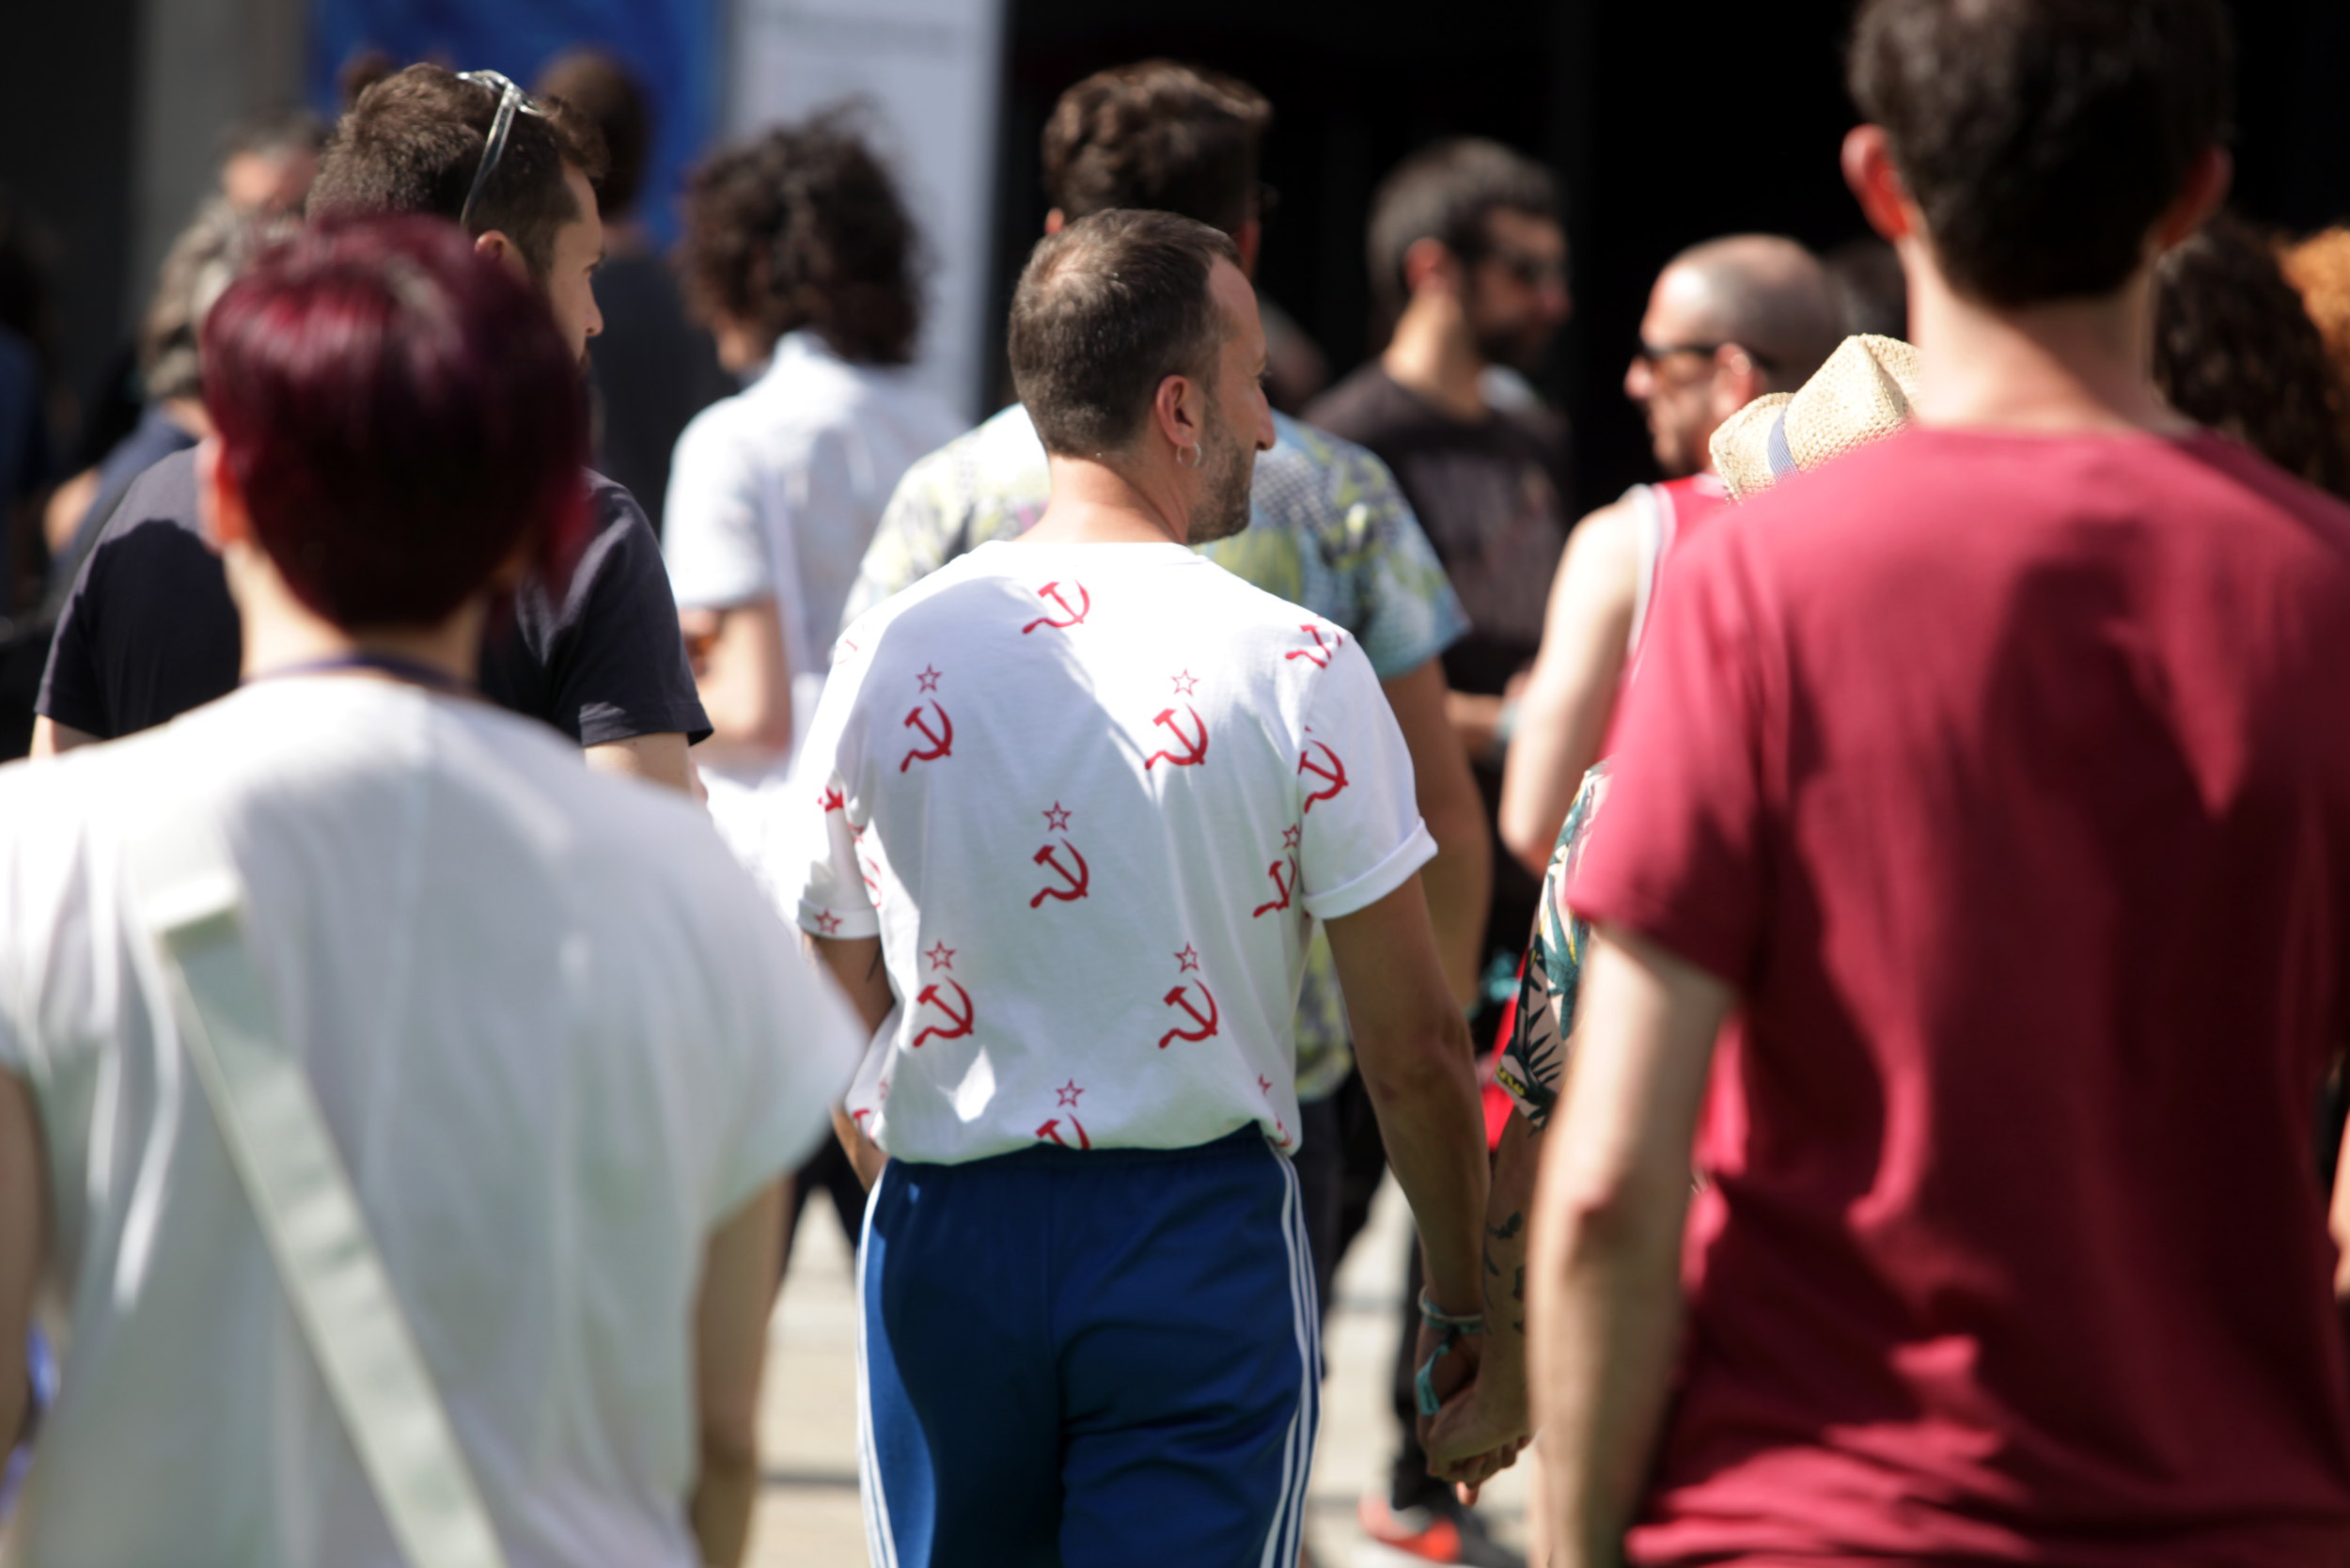 People heading to one of Sónar 2016 venues, at Barcelona Fira de Montjuic (by ACN)